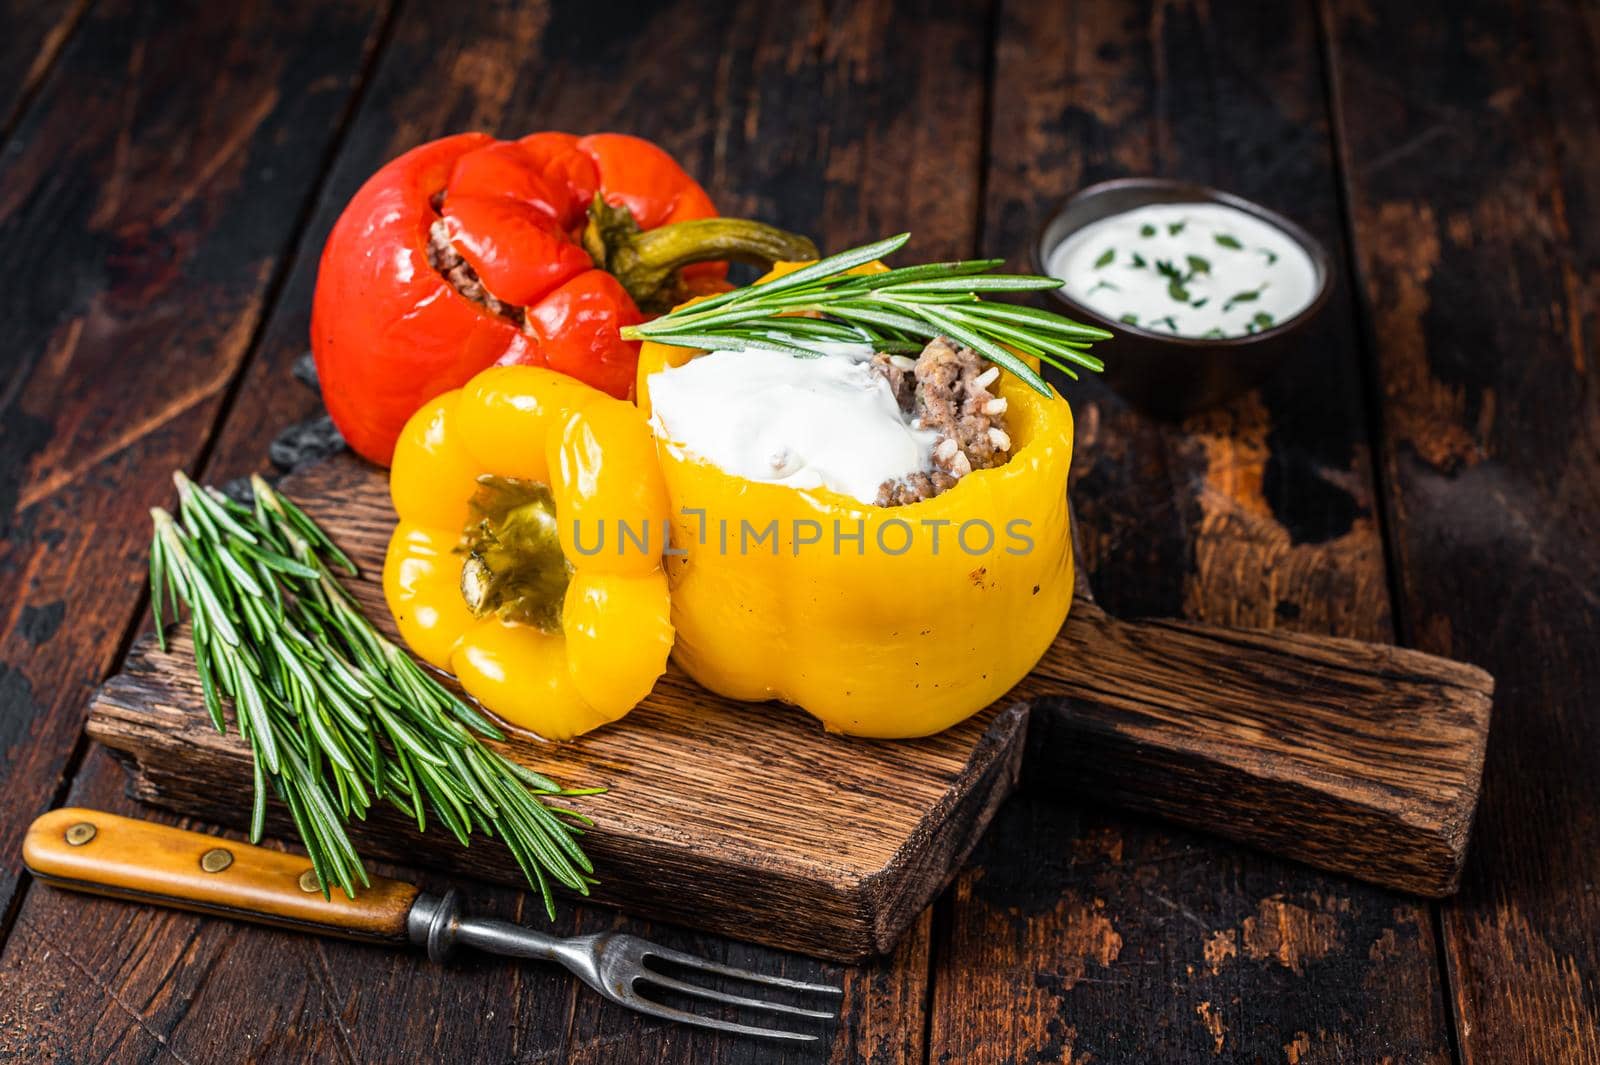 Roast bell pepper stuffed with beef meat, rice and vegetables on a wooden board. Dark wooden background. Top view.